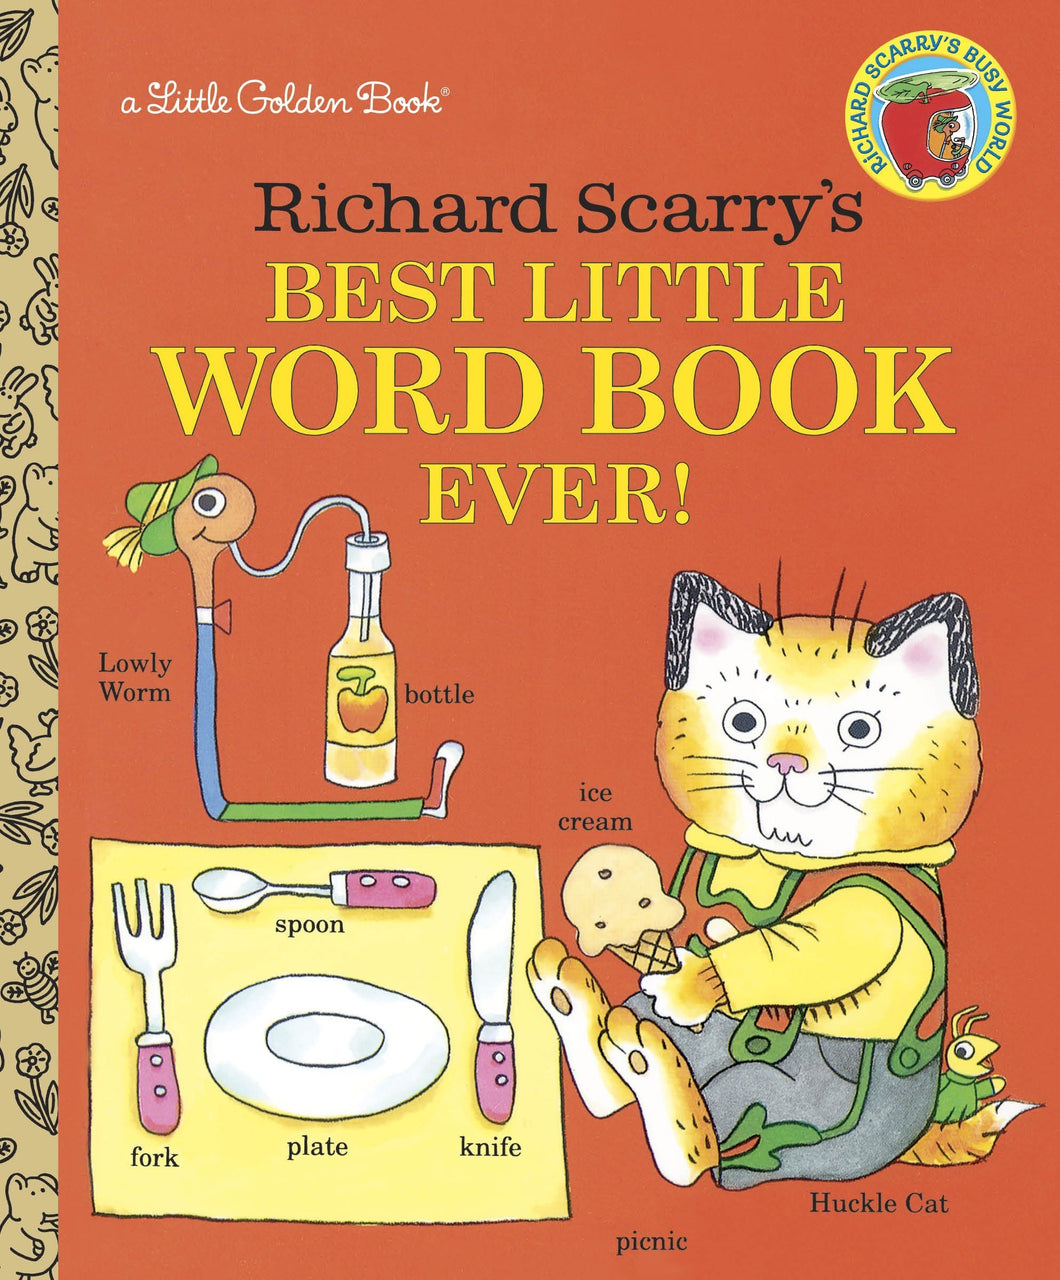 Richard Scarry's Best Little Word Book Ever [Richard Scarry]